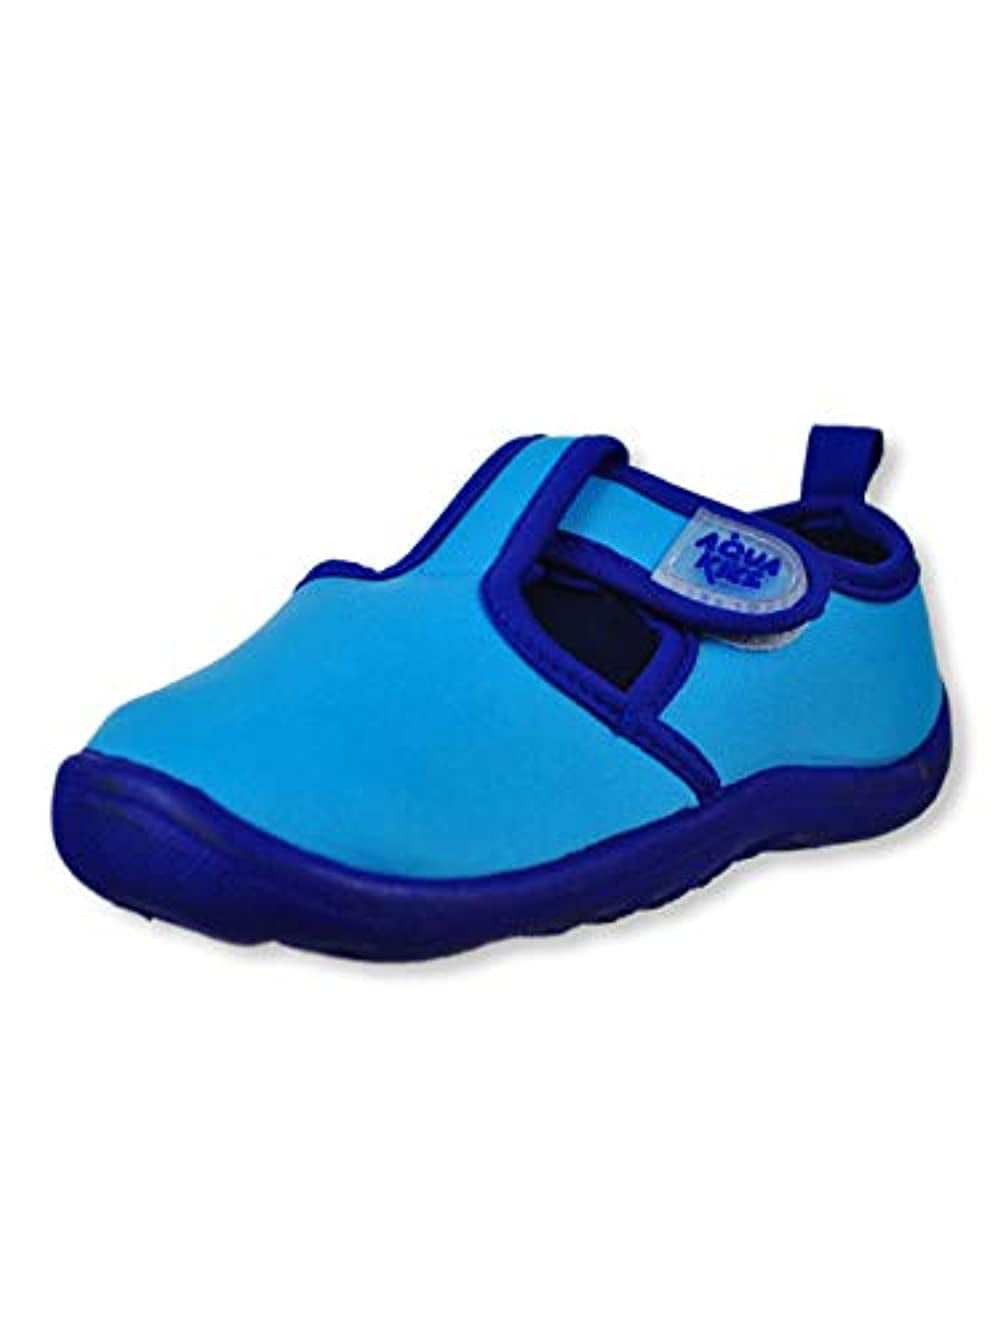 Aquakiks Boys Girls and Unisex Summer Water Shoes for Little Kids and Toddlers 